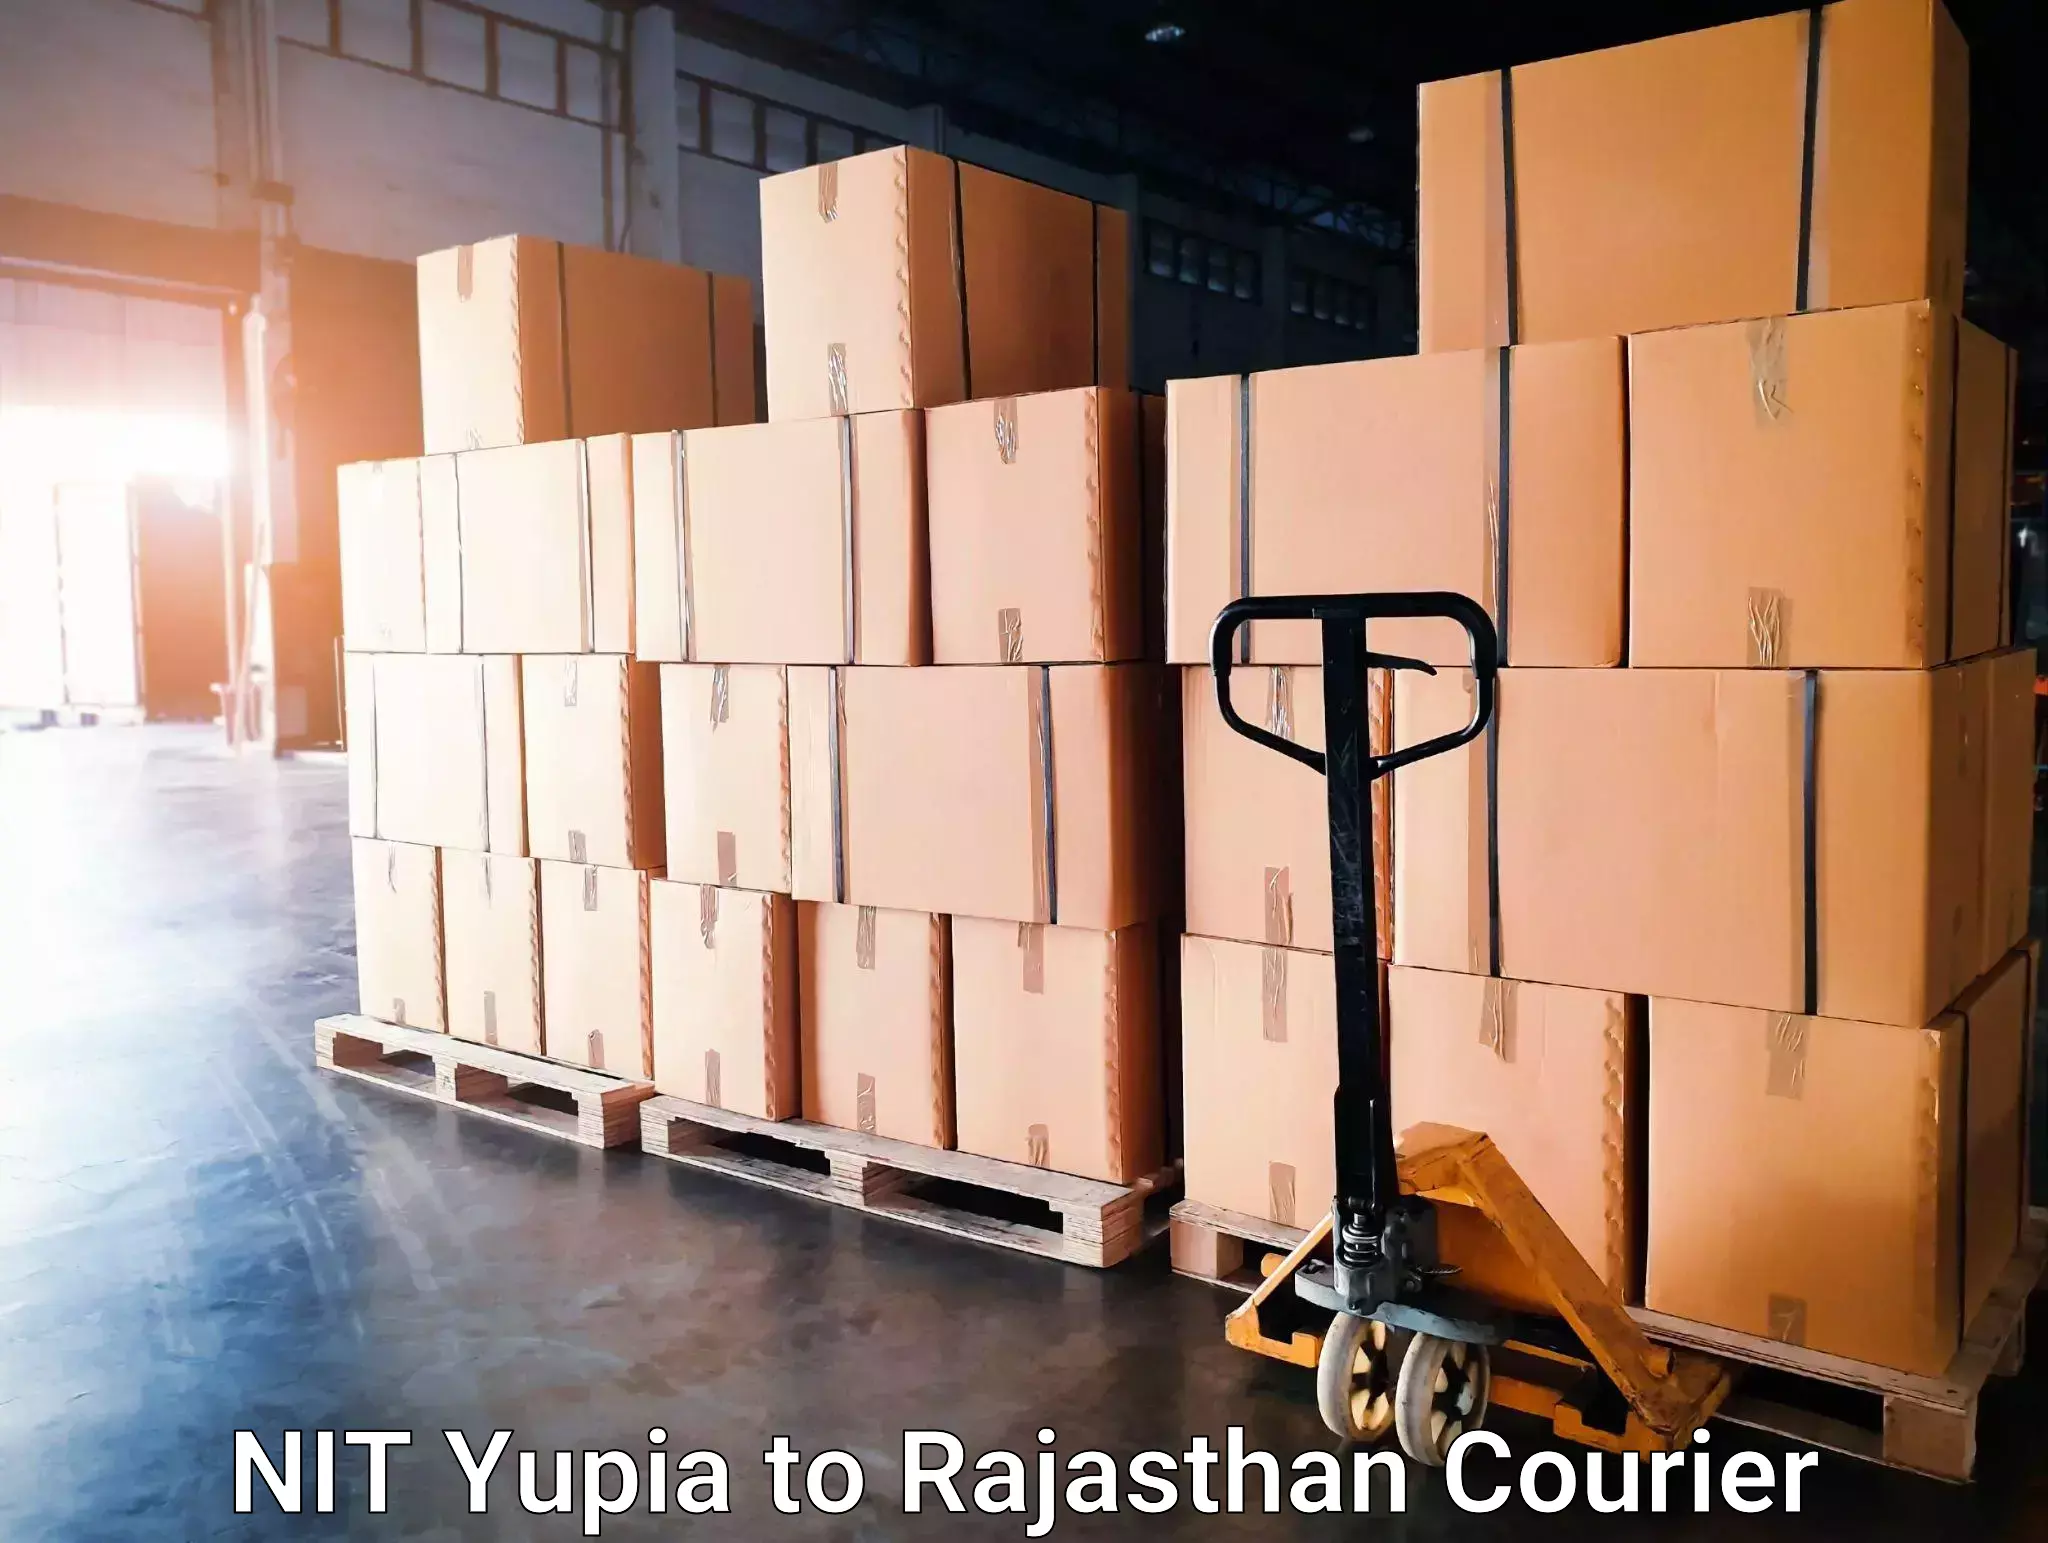 Overnight delivery services NIT Yupia to Bhiwadi